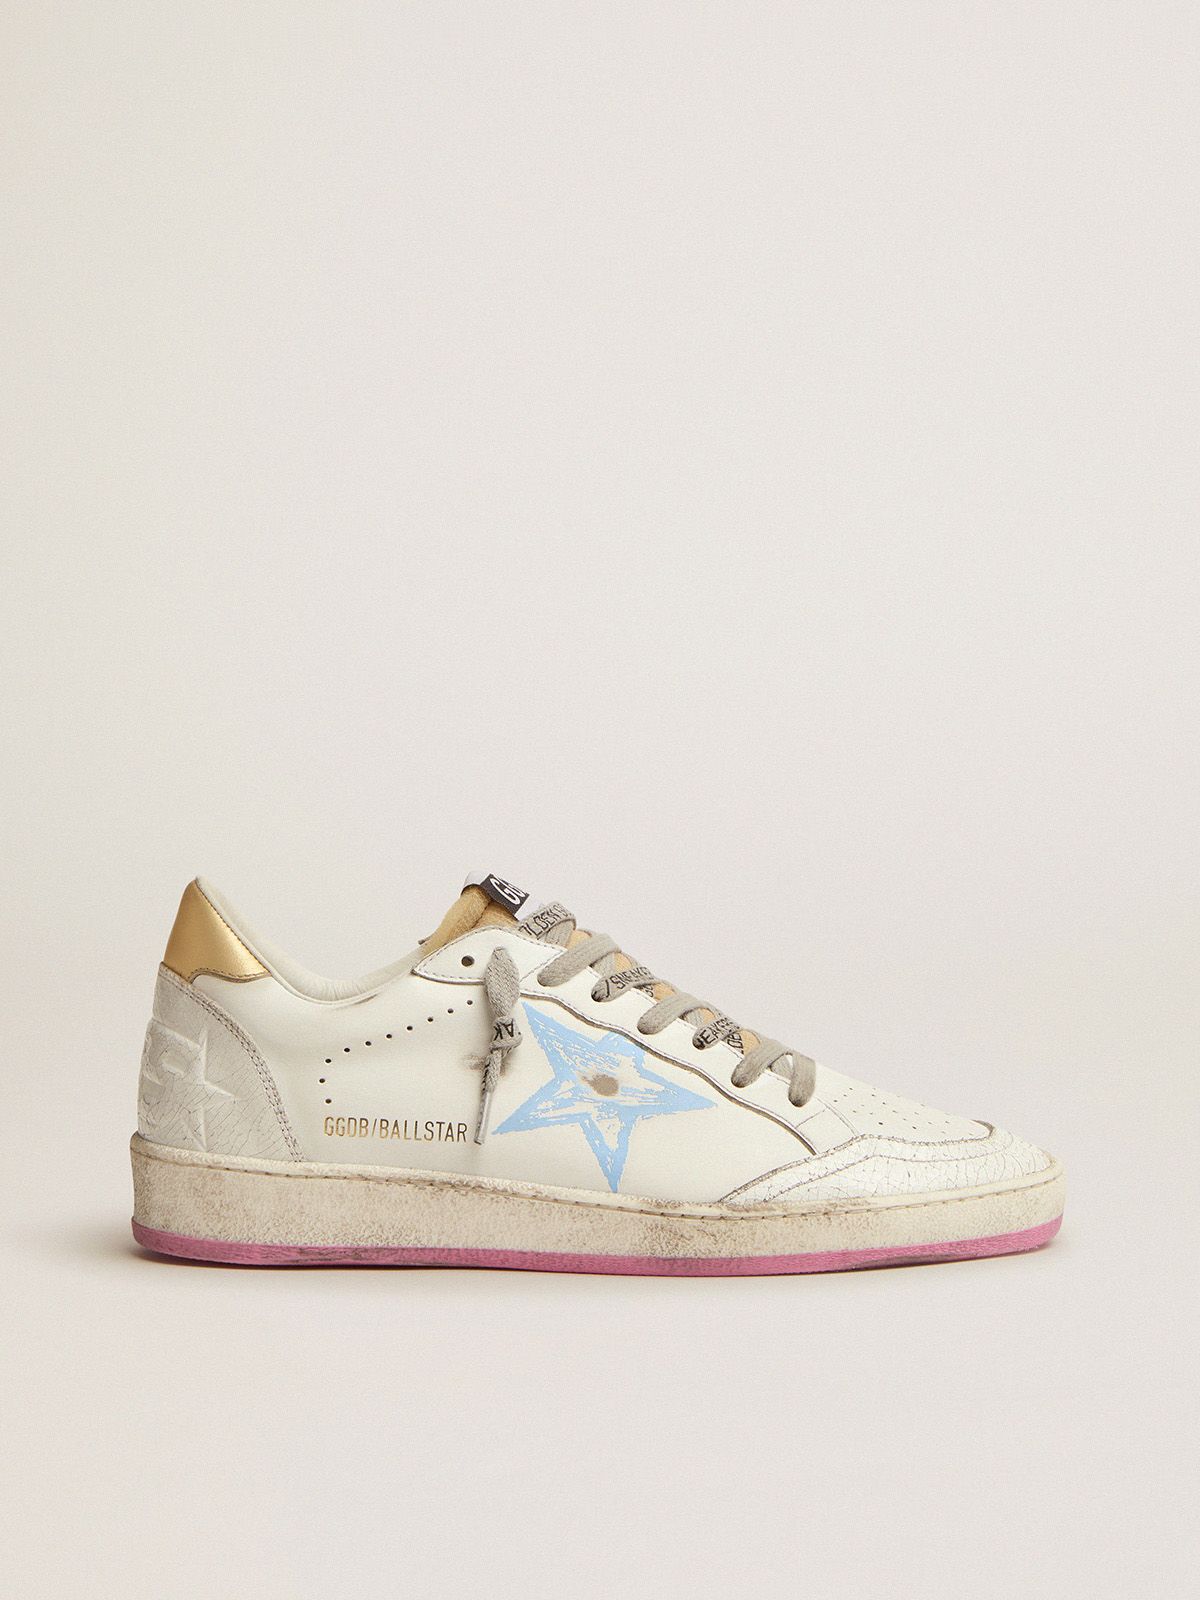 Ball Star sneakers with gold laminated leather heel tab and foam rubber tongue | 